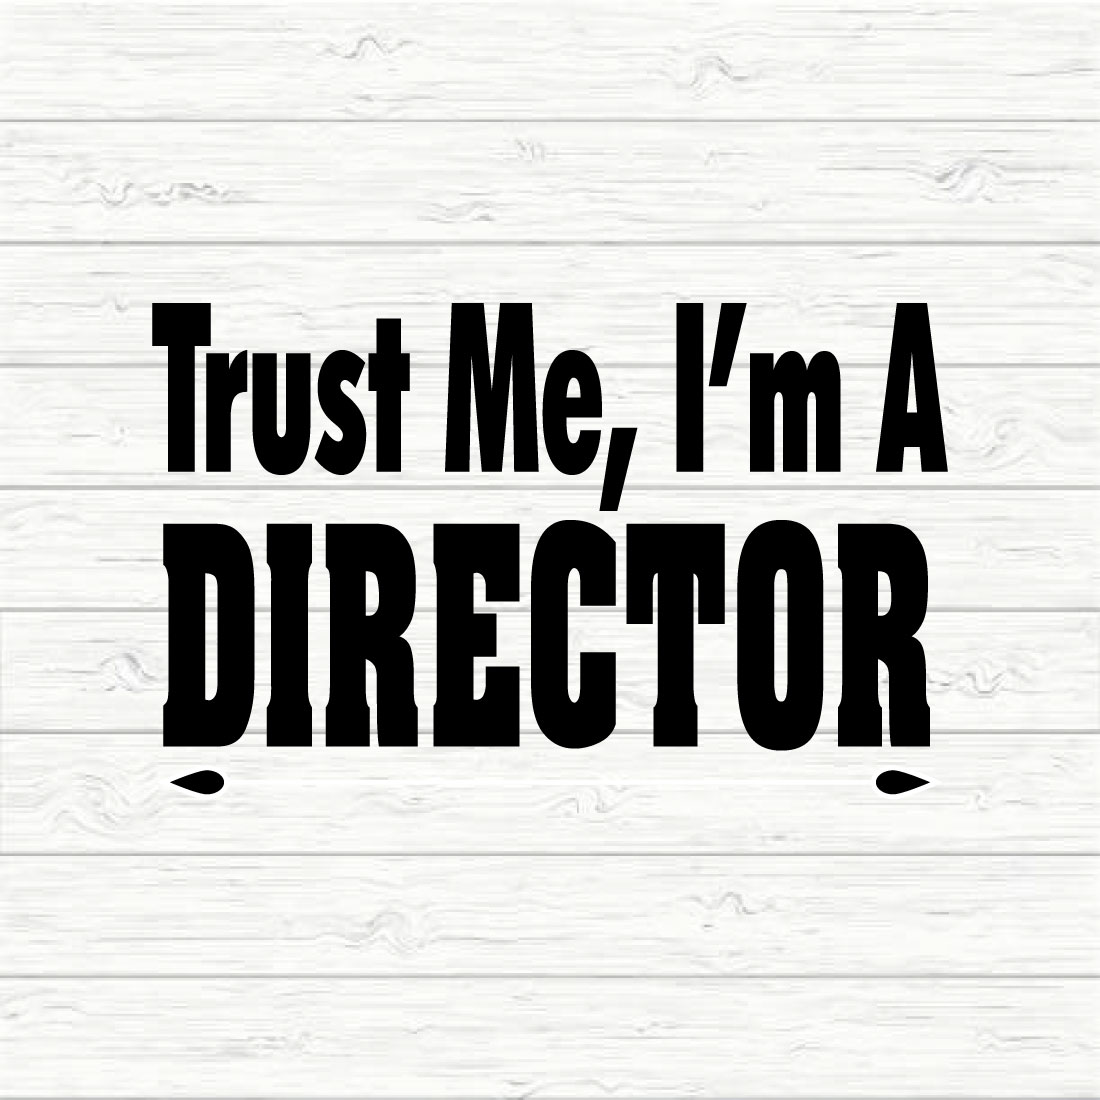 Trust Me I'm A Director preview image.